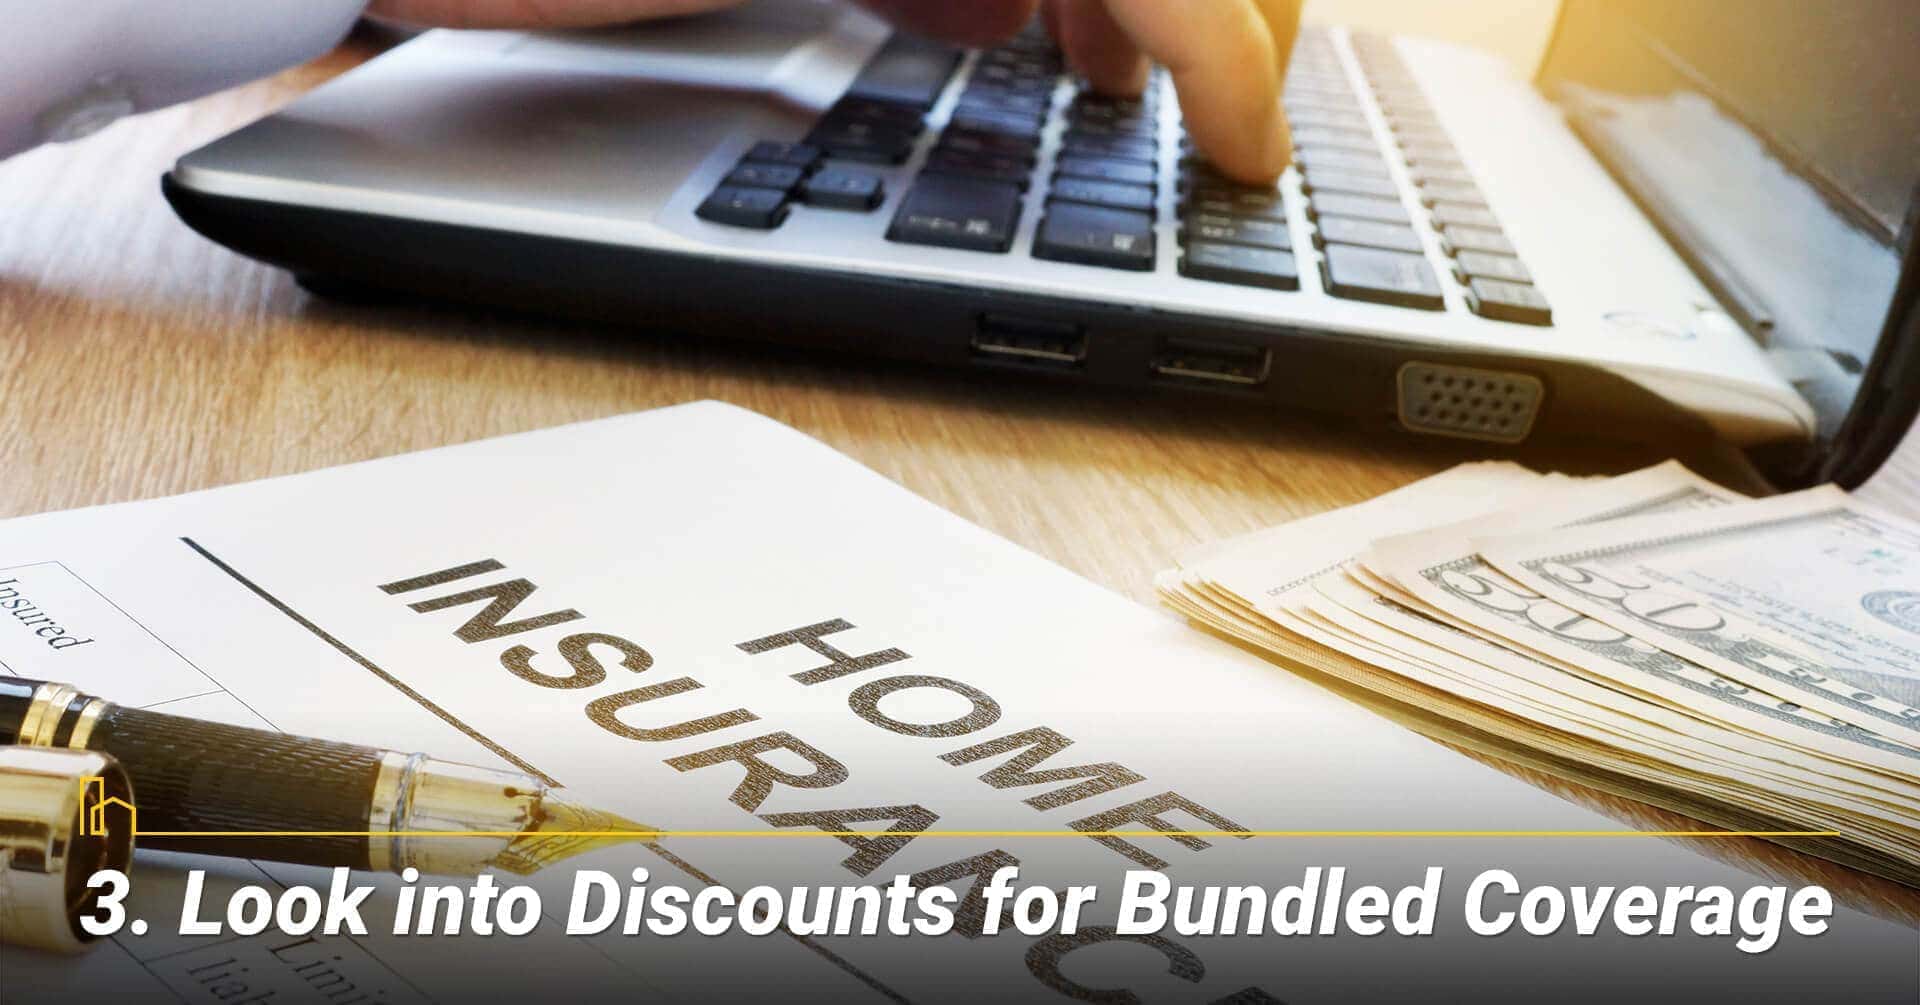 Look into Discounts for Bundled Coverage, bundled your coverage for better rate